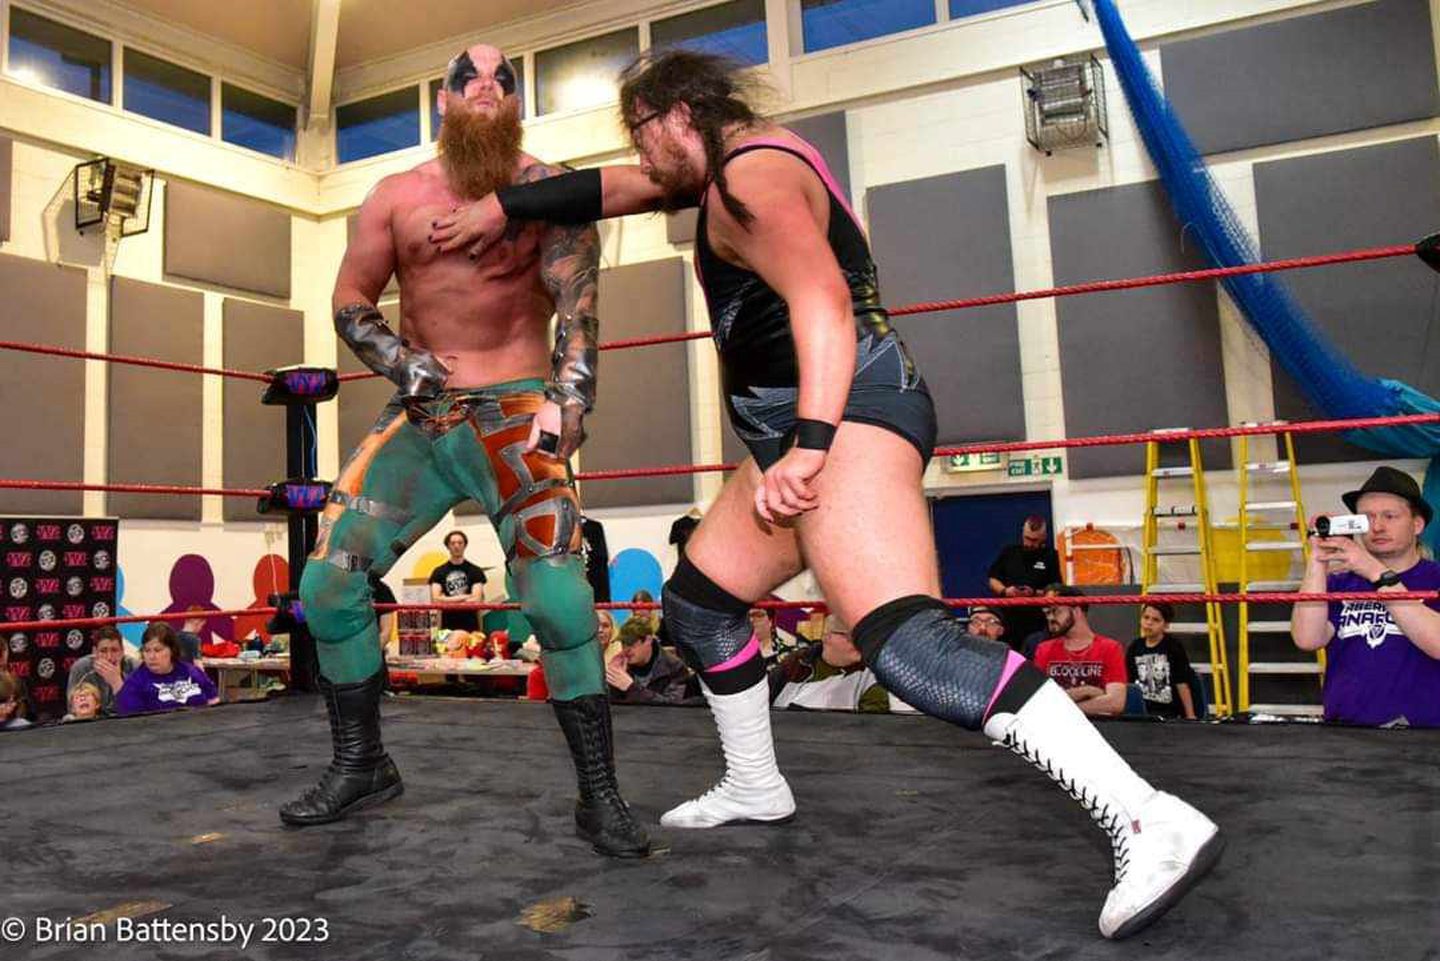 Caleb Valhalla wrestles against friend Lost Boy Aspen Faith. Image supplied by Brian Battensby.